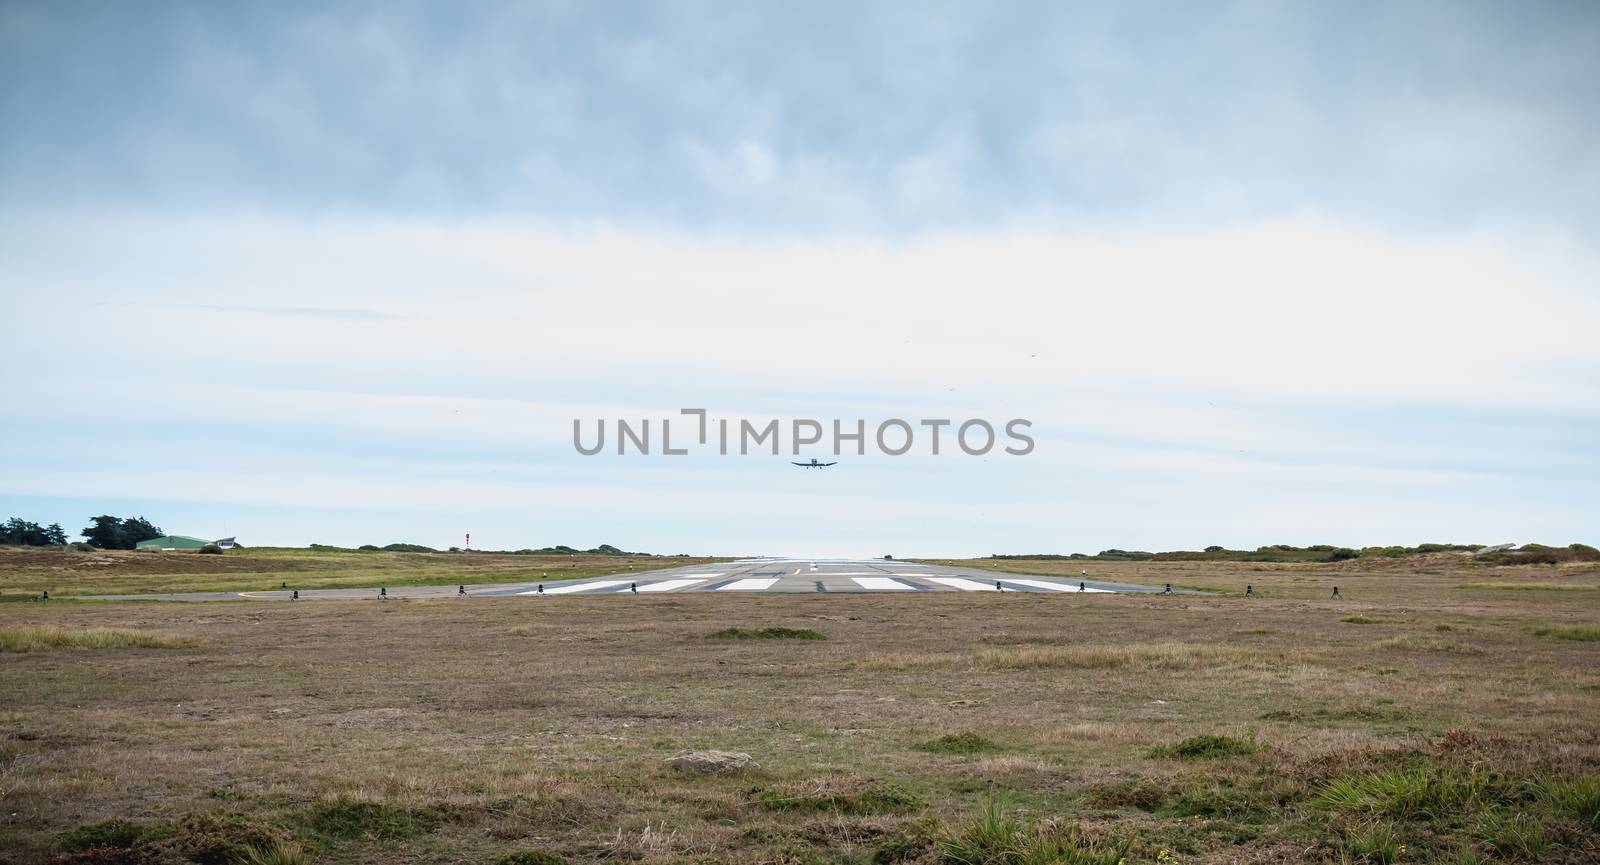 Port Joinville, France - September 16, 2018: Small passenger plane taking off from an airfield on Yeu Island near France on a fall day